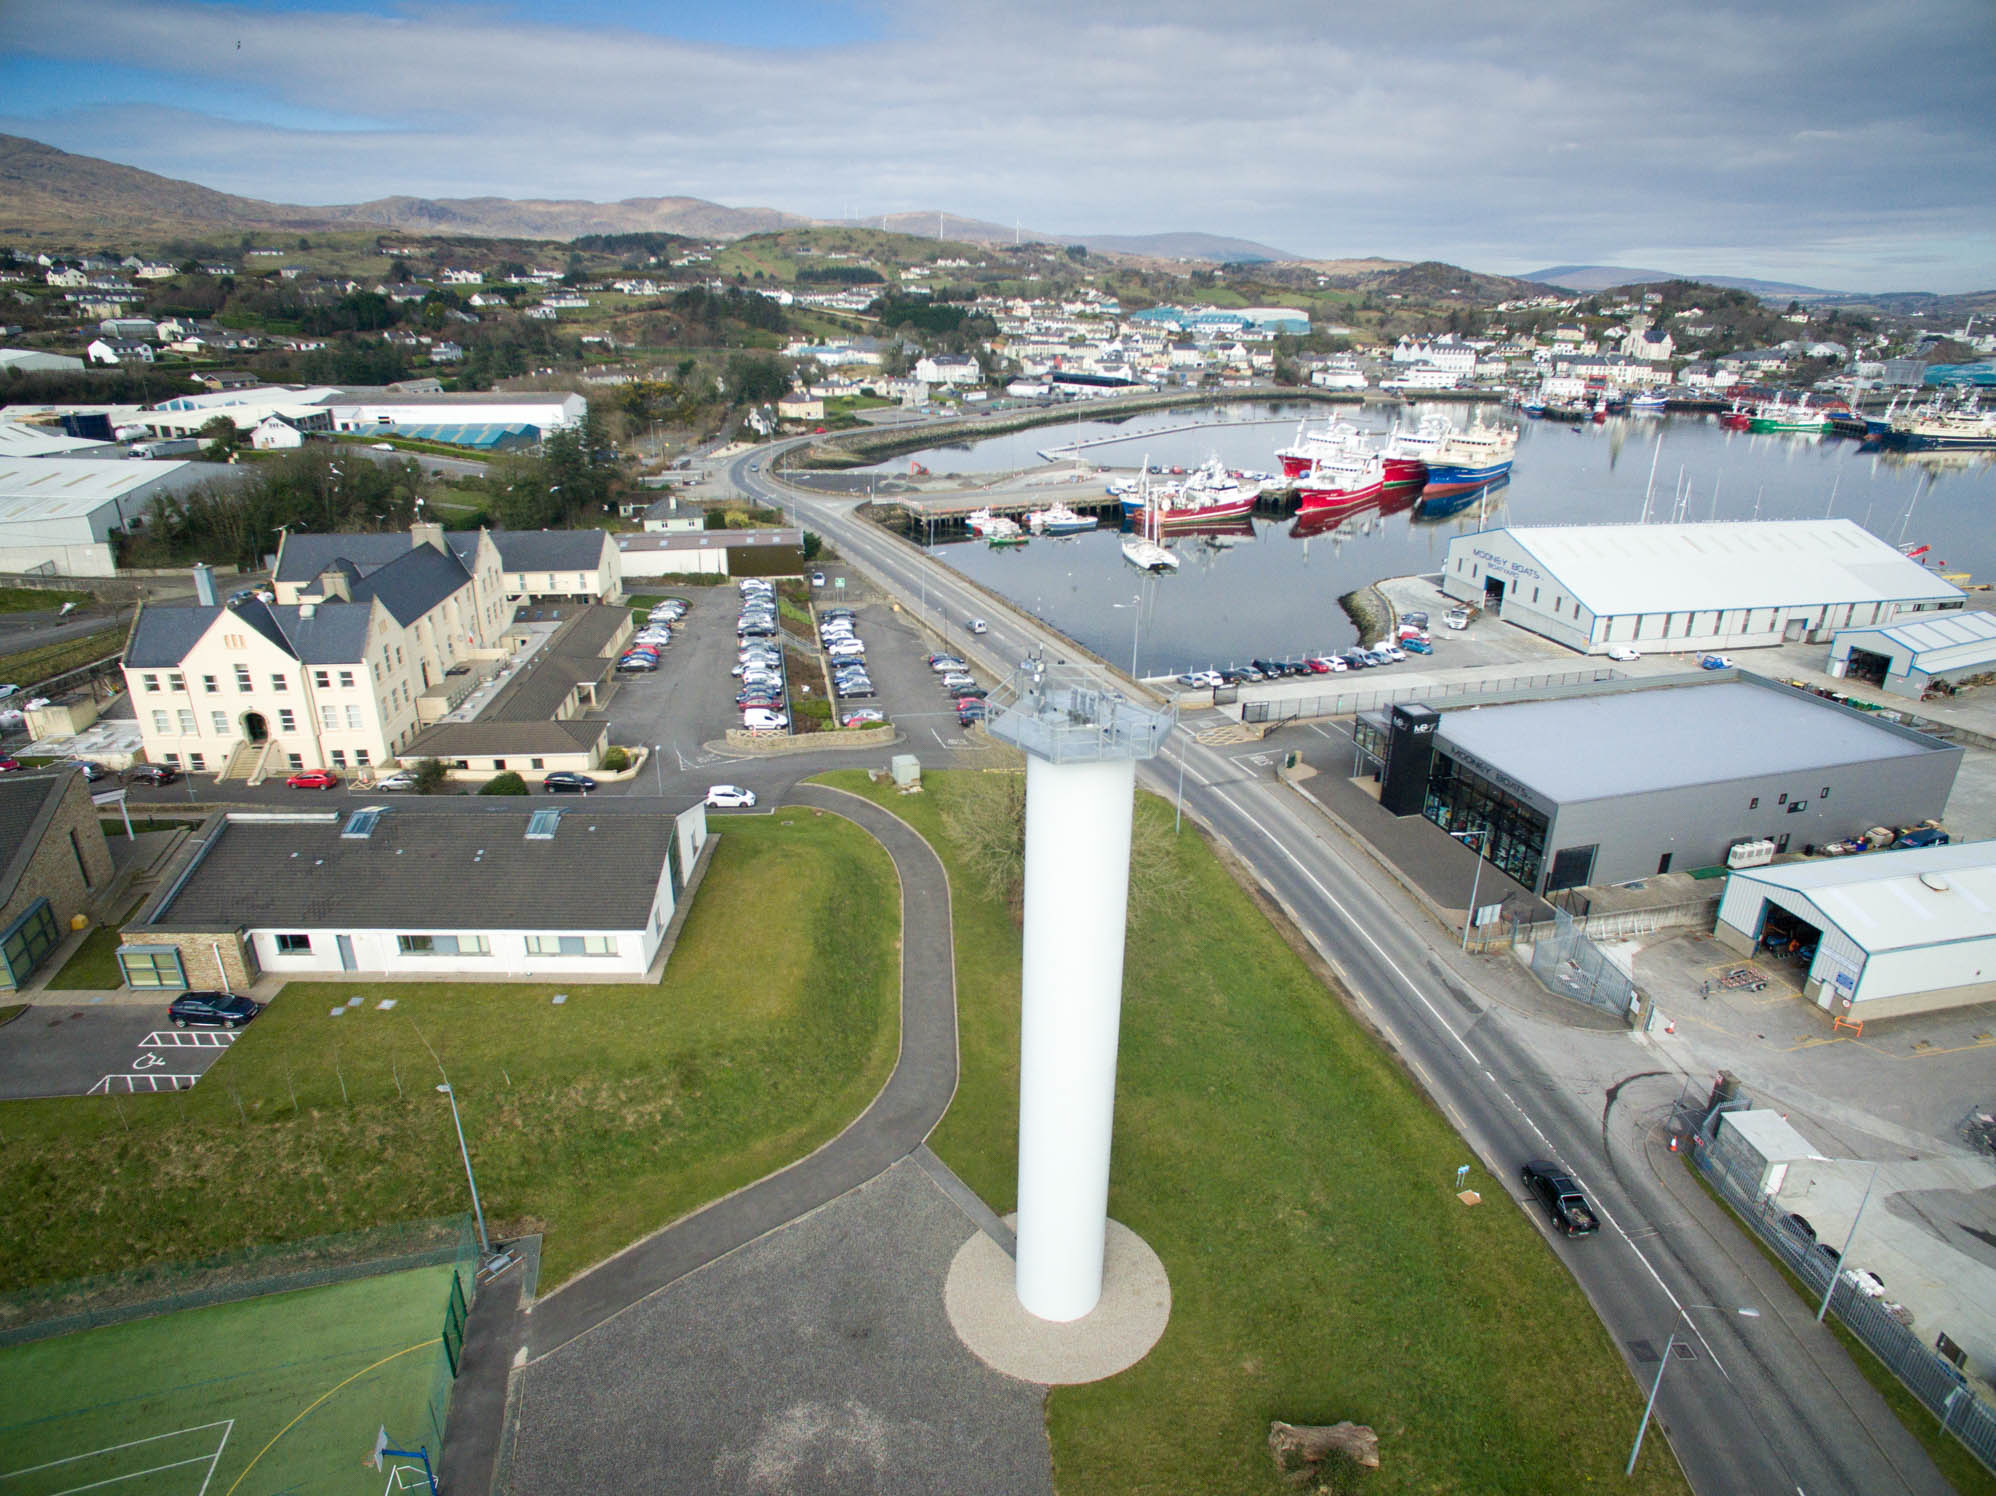 Aerial view of Killybegs